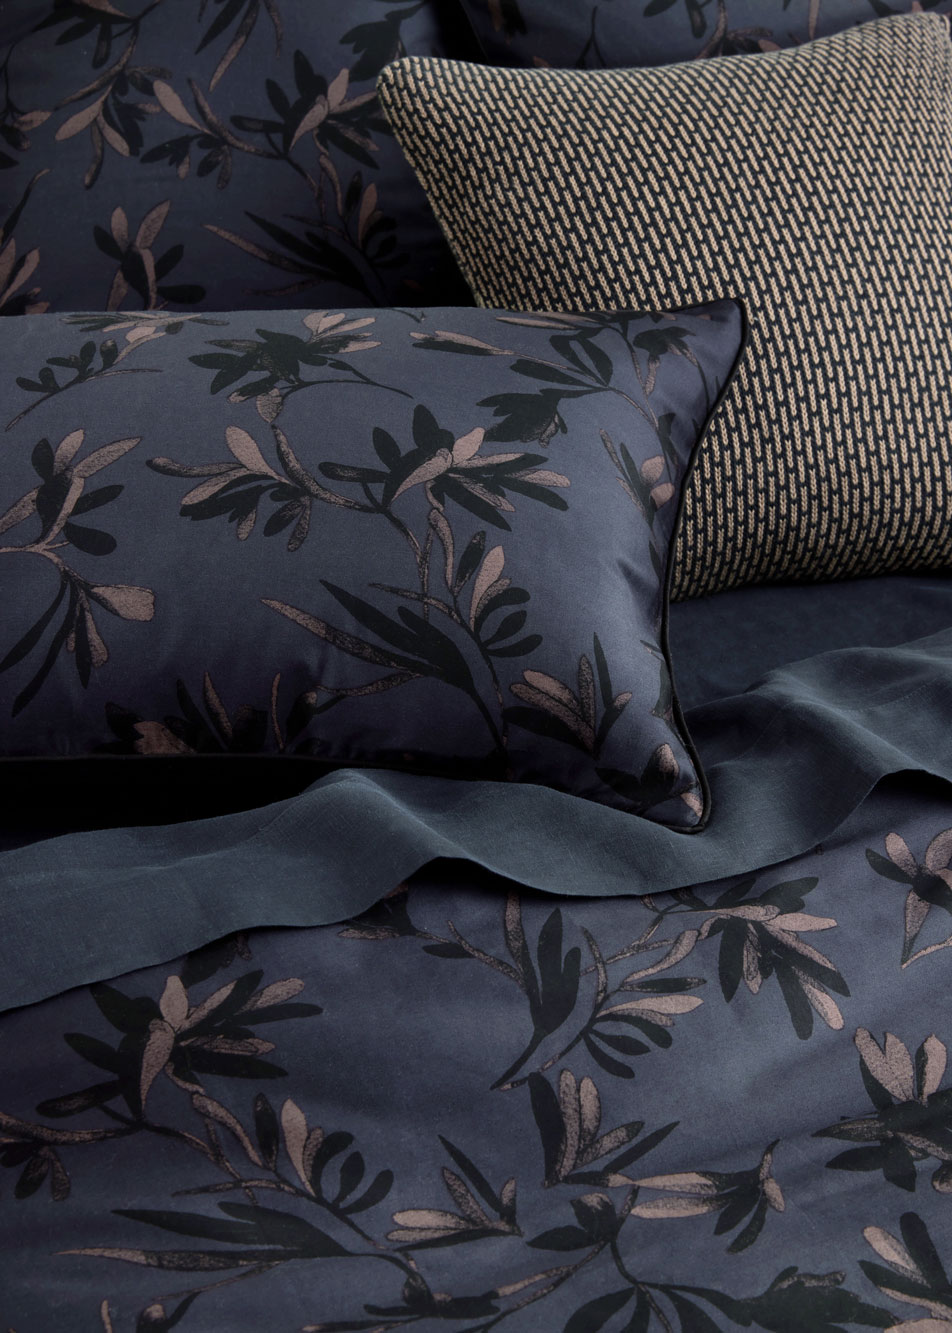 A close-up of a bed dressed in dark bed linen, with black sheets, a black and brown botanical print quilt cover, and a knit cushion.